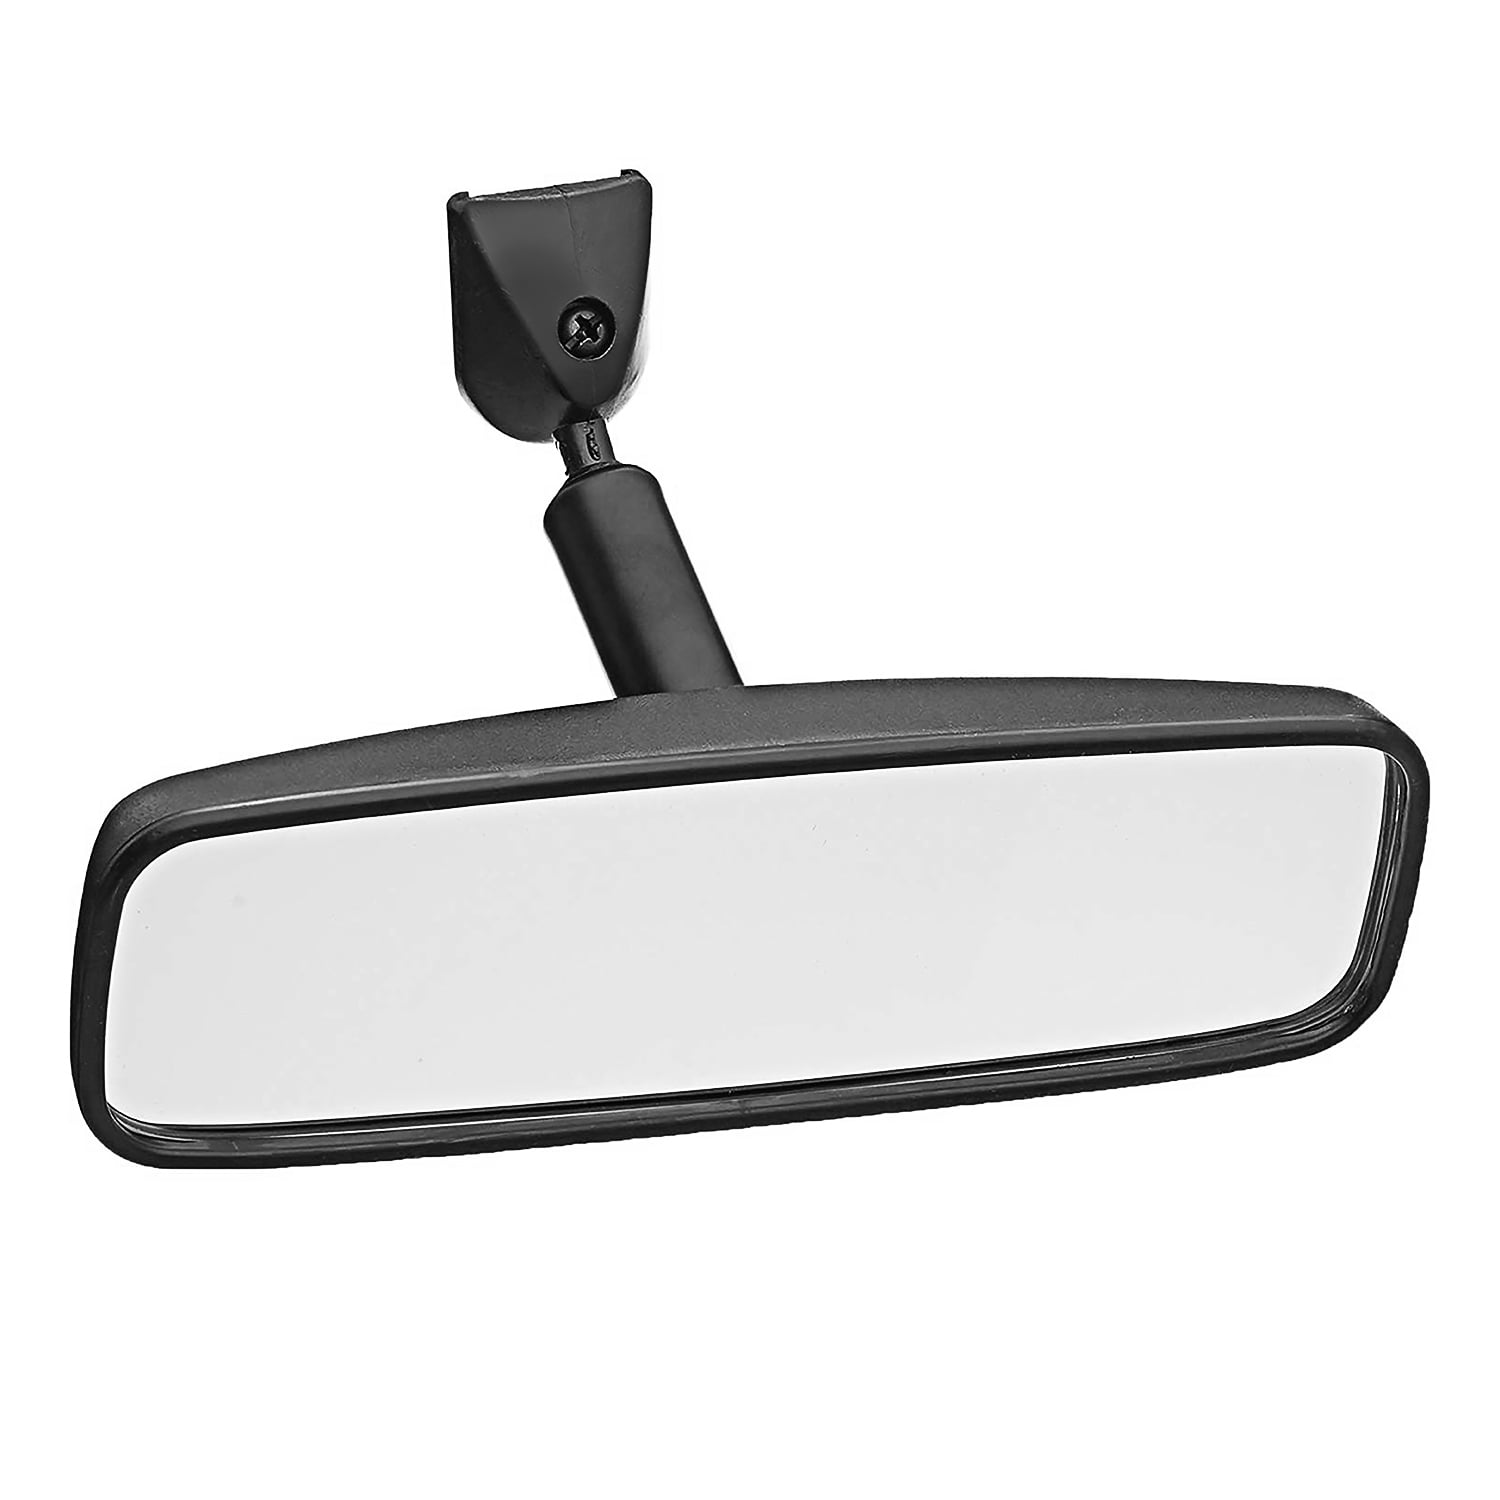 Rear View Mirror with blind spot mirror set,300mm/12 Anti Glare Wide Angle Panoramic Rearview Mirror Clip on Original Mirror to Eliminate Blind Spot and Antiglare for Cars SUV Trucks 